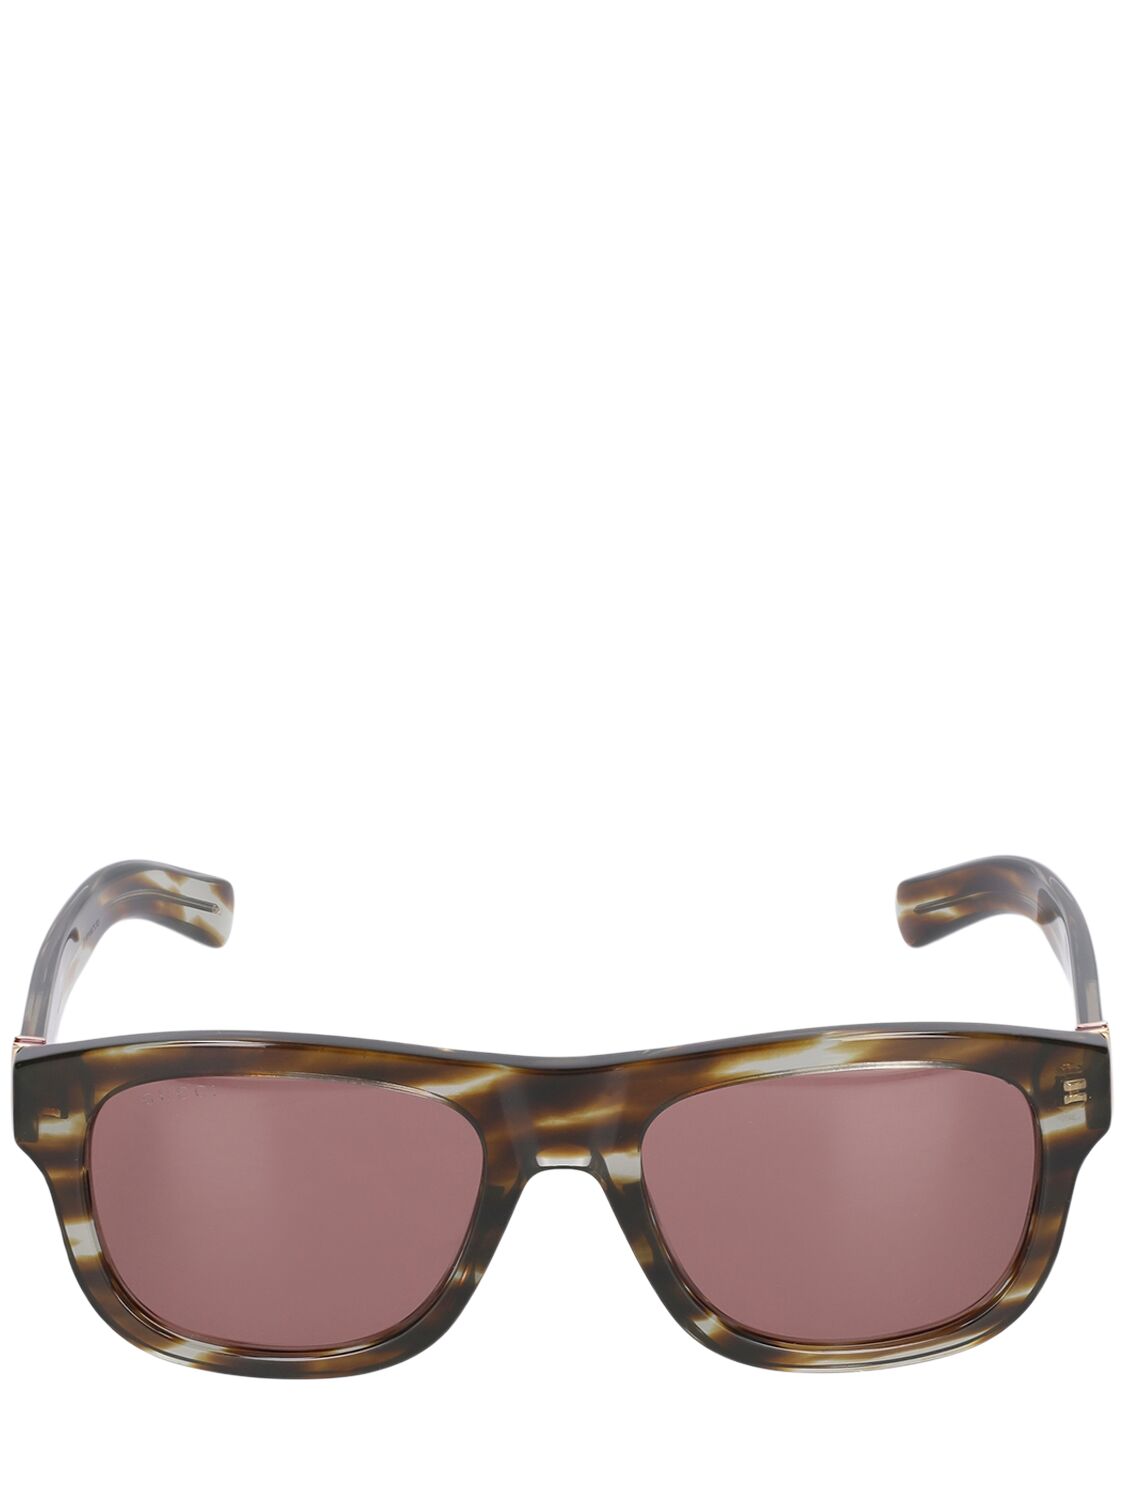 Image of Gg1509s Acetate Oval Frame Sunglasses